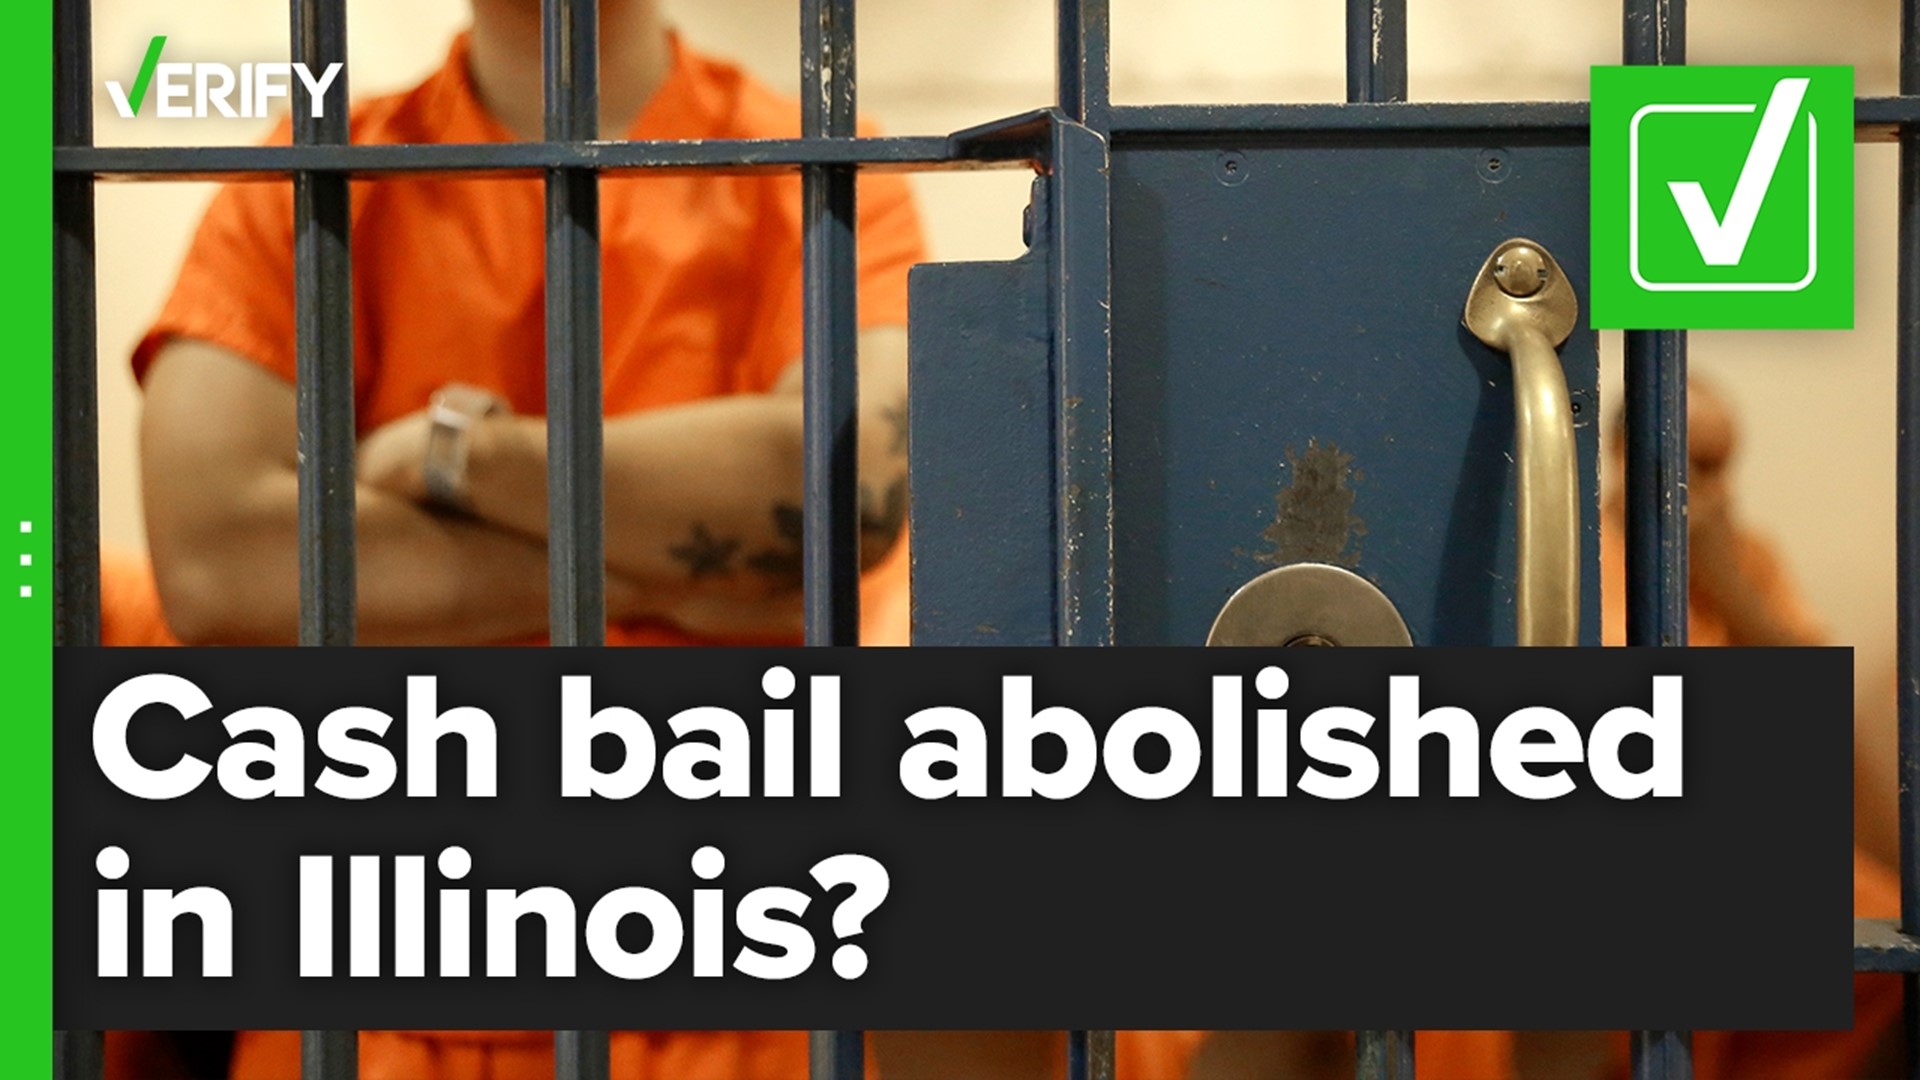 Many VERIFY readers asked if the SAFE-T Act in Illinois does away with cash bail for detainees in the state. Here’s what the law says.